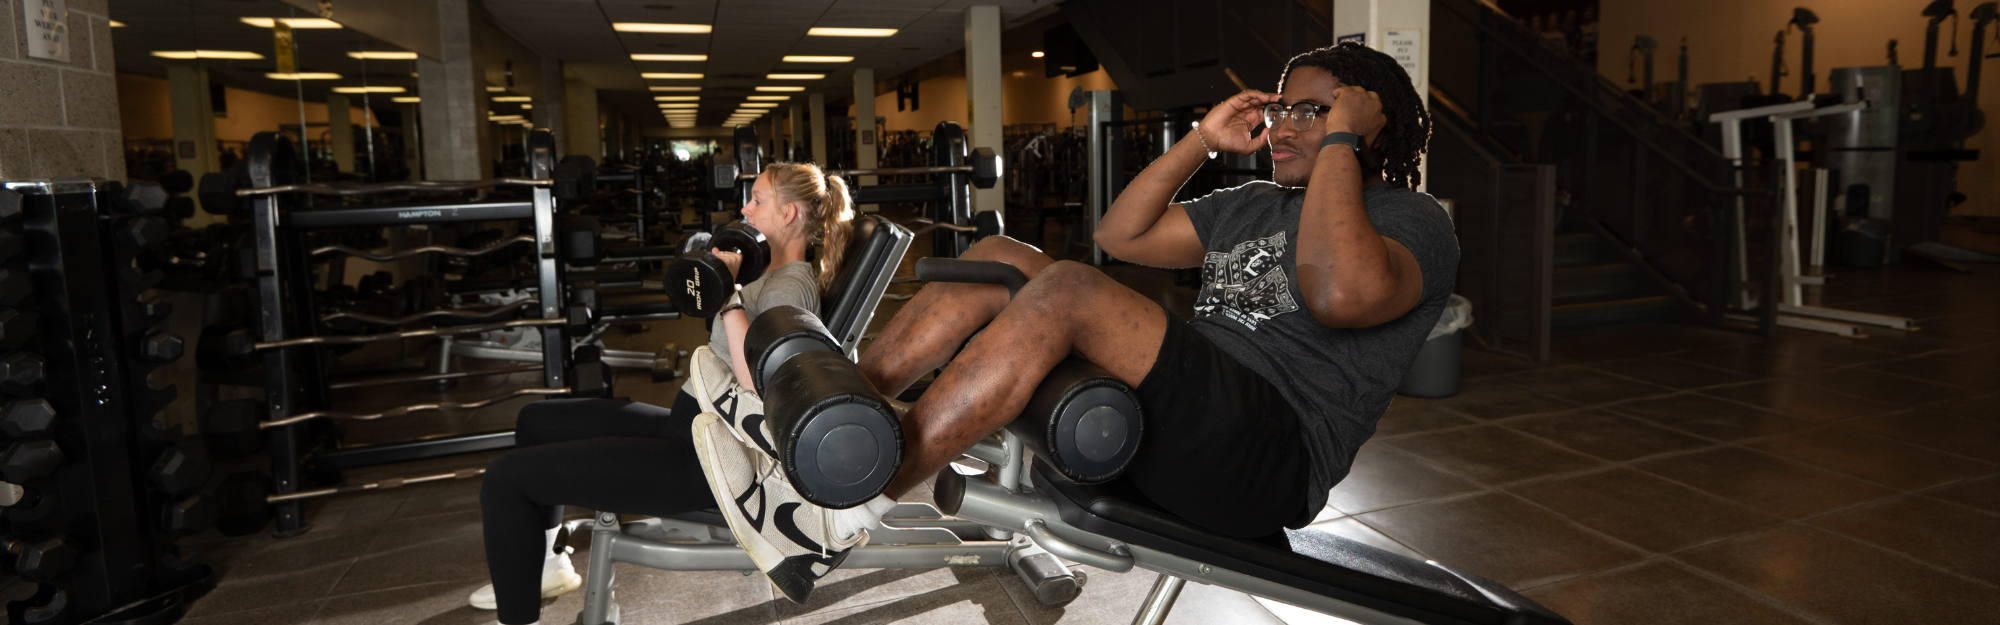 Two student staff working out in the Weight Room area of the Western student recreation centre on the equipment